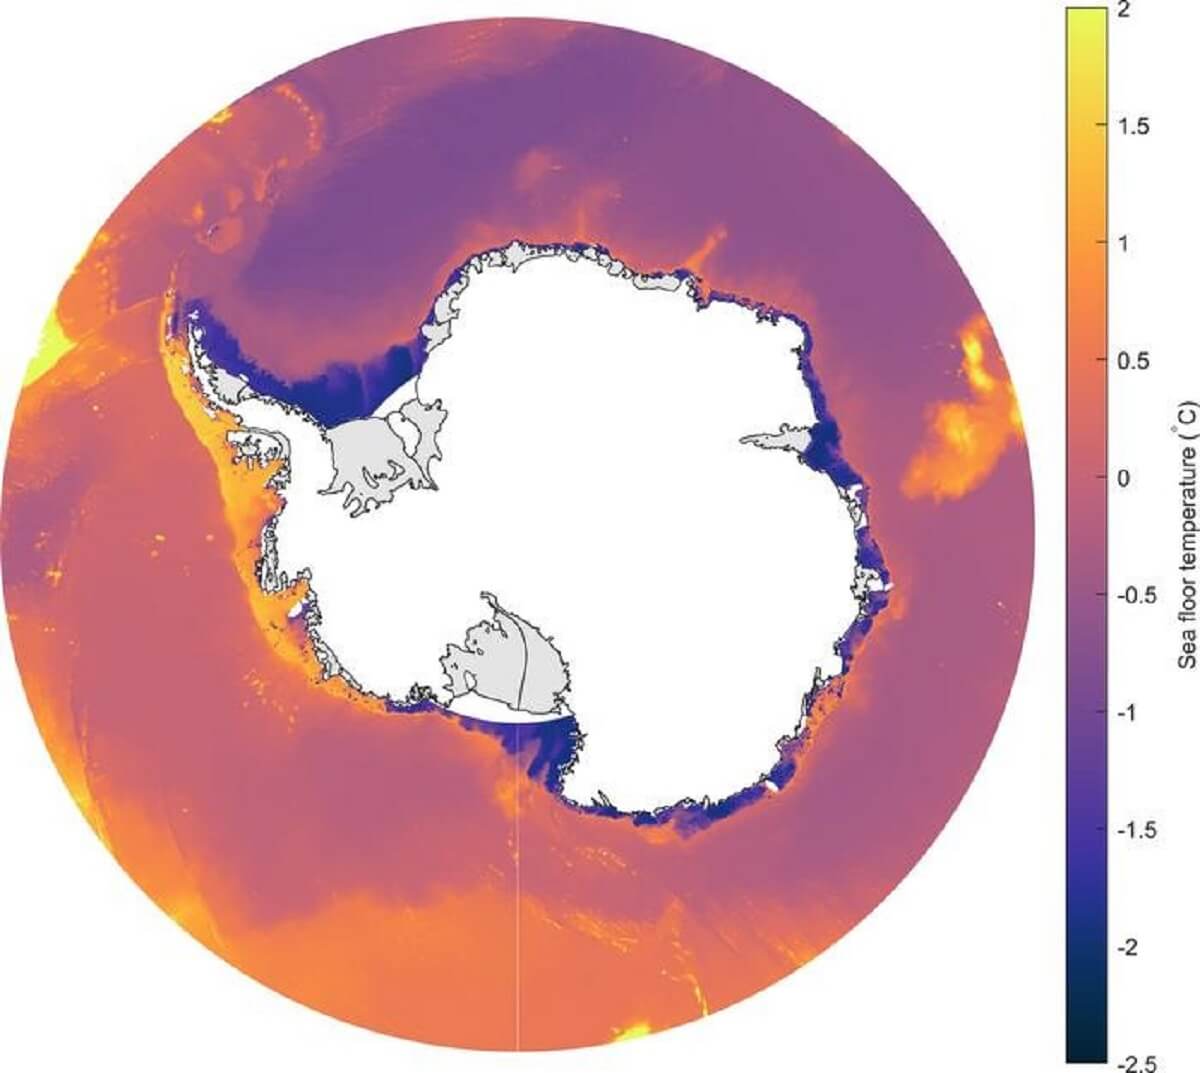 The graphic shows the water temperatures around the Antarctic. On the western side of Antarctica, water temperature at the sea floor is approaching 2 degrees C - and that is warm enough to melt the ice that is flowing on top of it. Sea temperatures on the eastern flank are colder. 